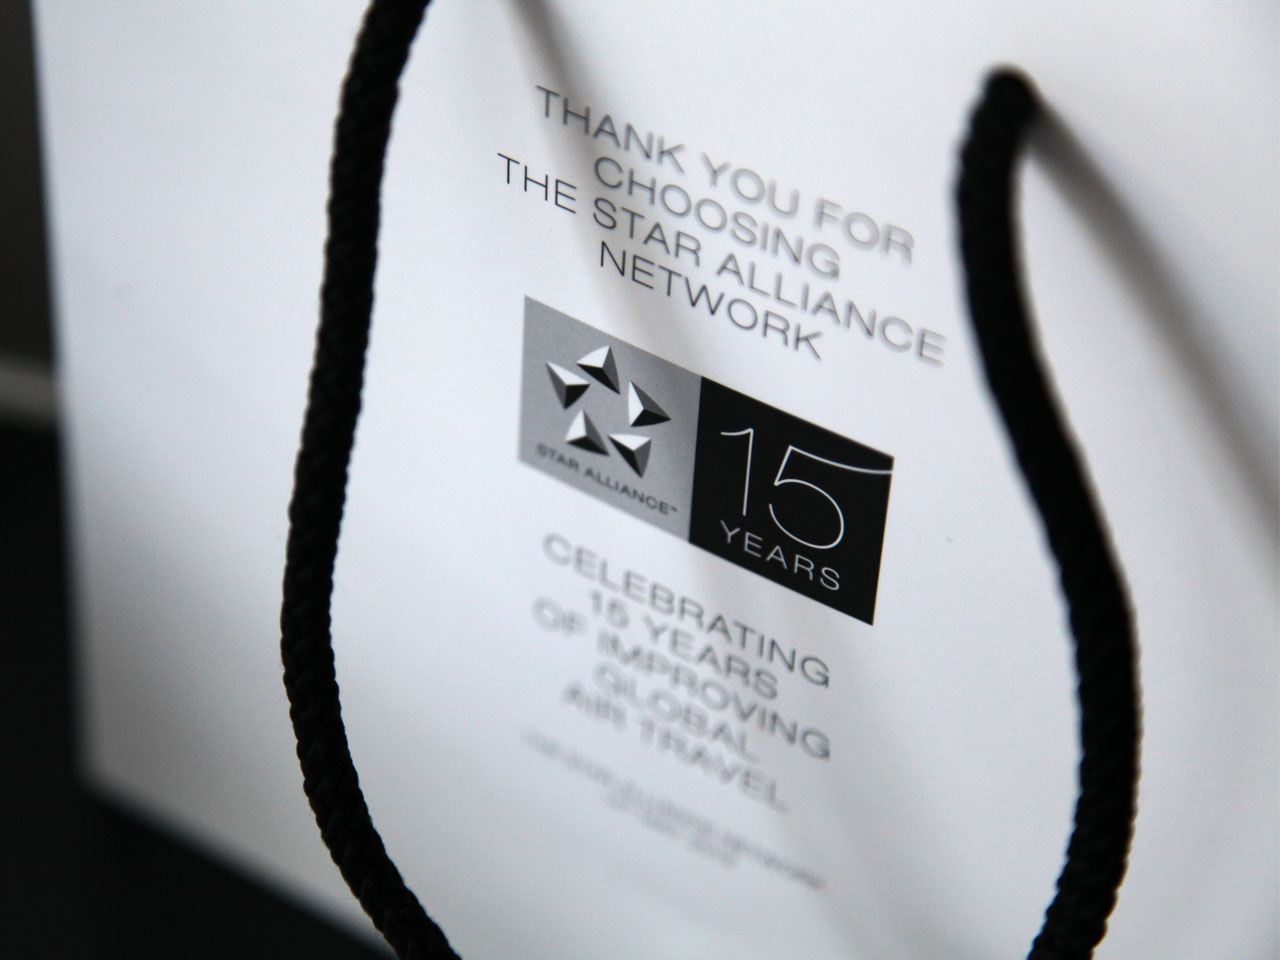 15 Years of Star Alliance — Story